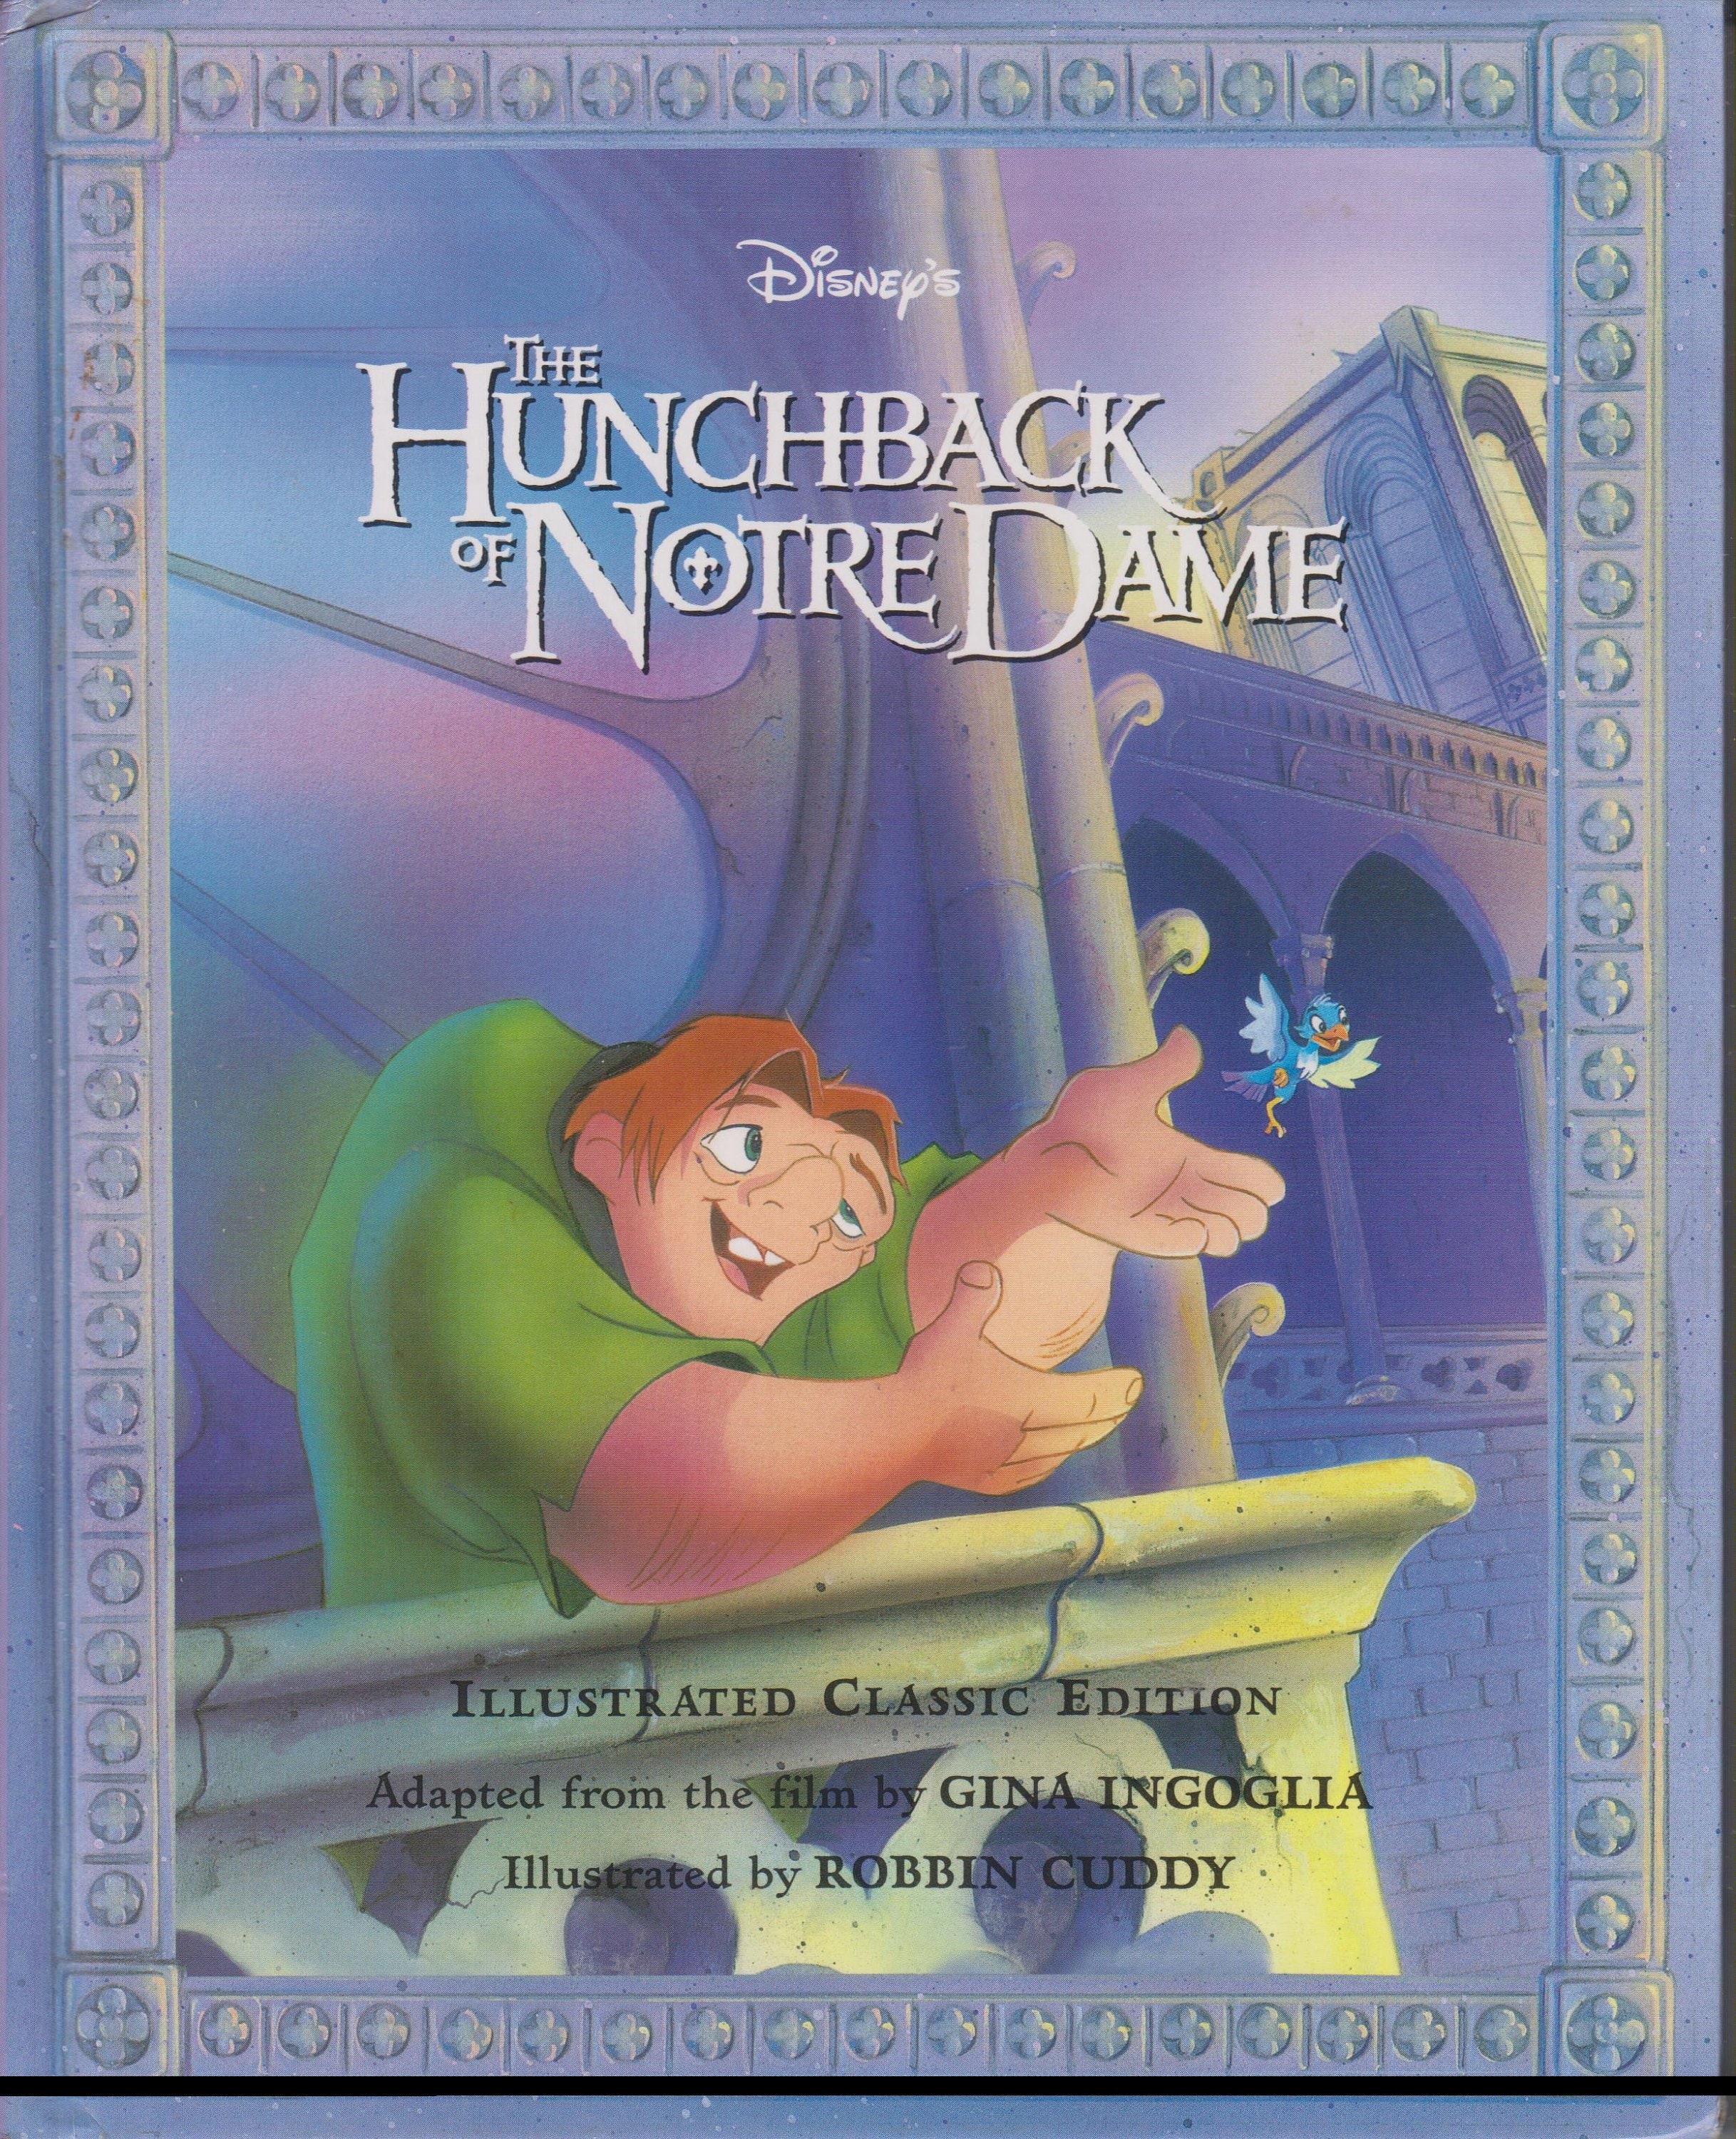 Disney's The Hunchback of Notre Dame: Illustrated Classic (Large